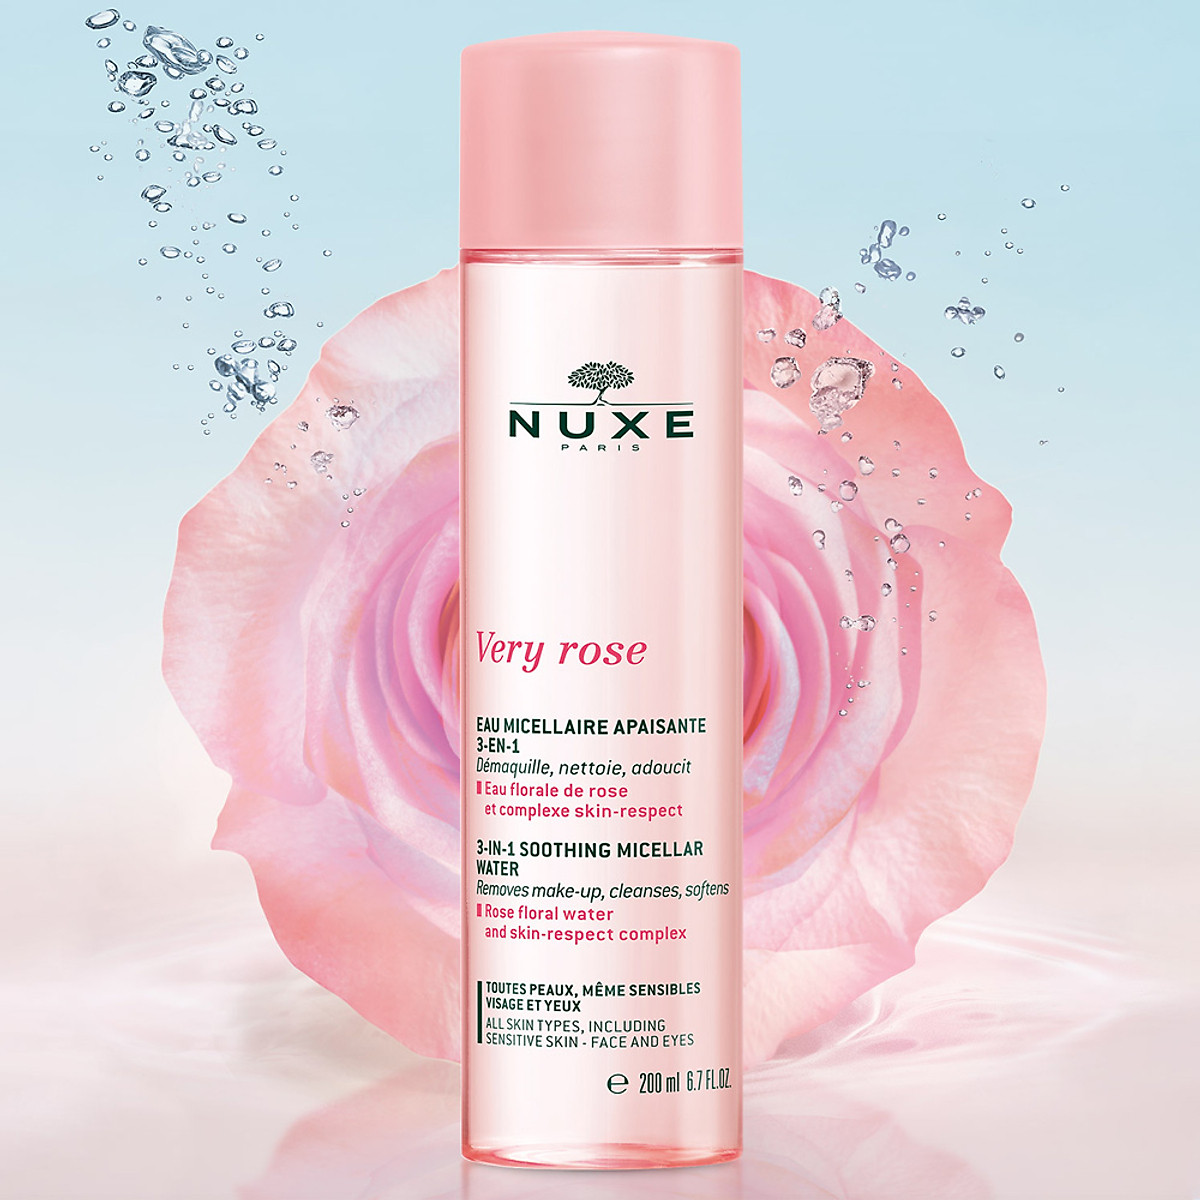 Nước Tẩy Trang Chiết Xuất Hoa Hồng Nuxe Very Rose 3-In-1 Soothing Micellar Water 200ml